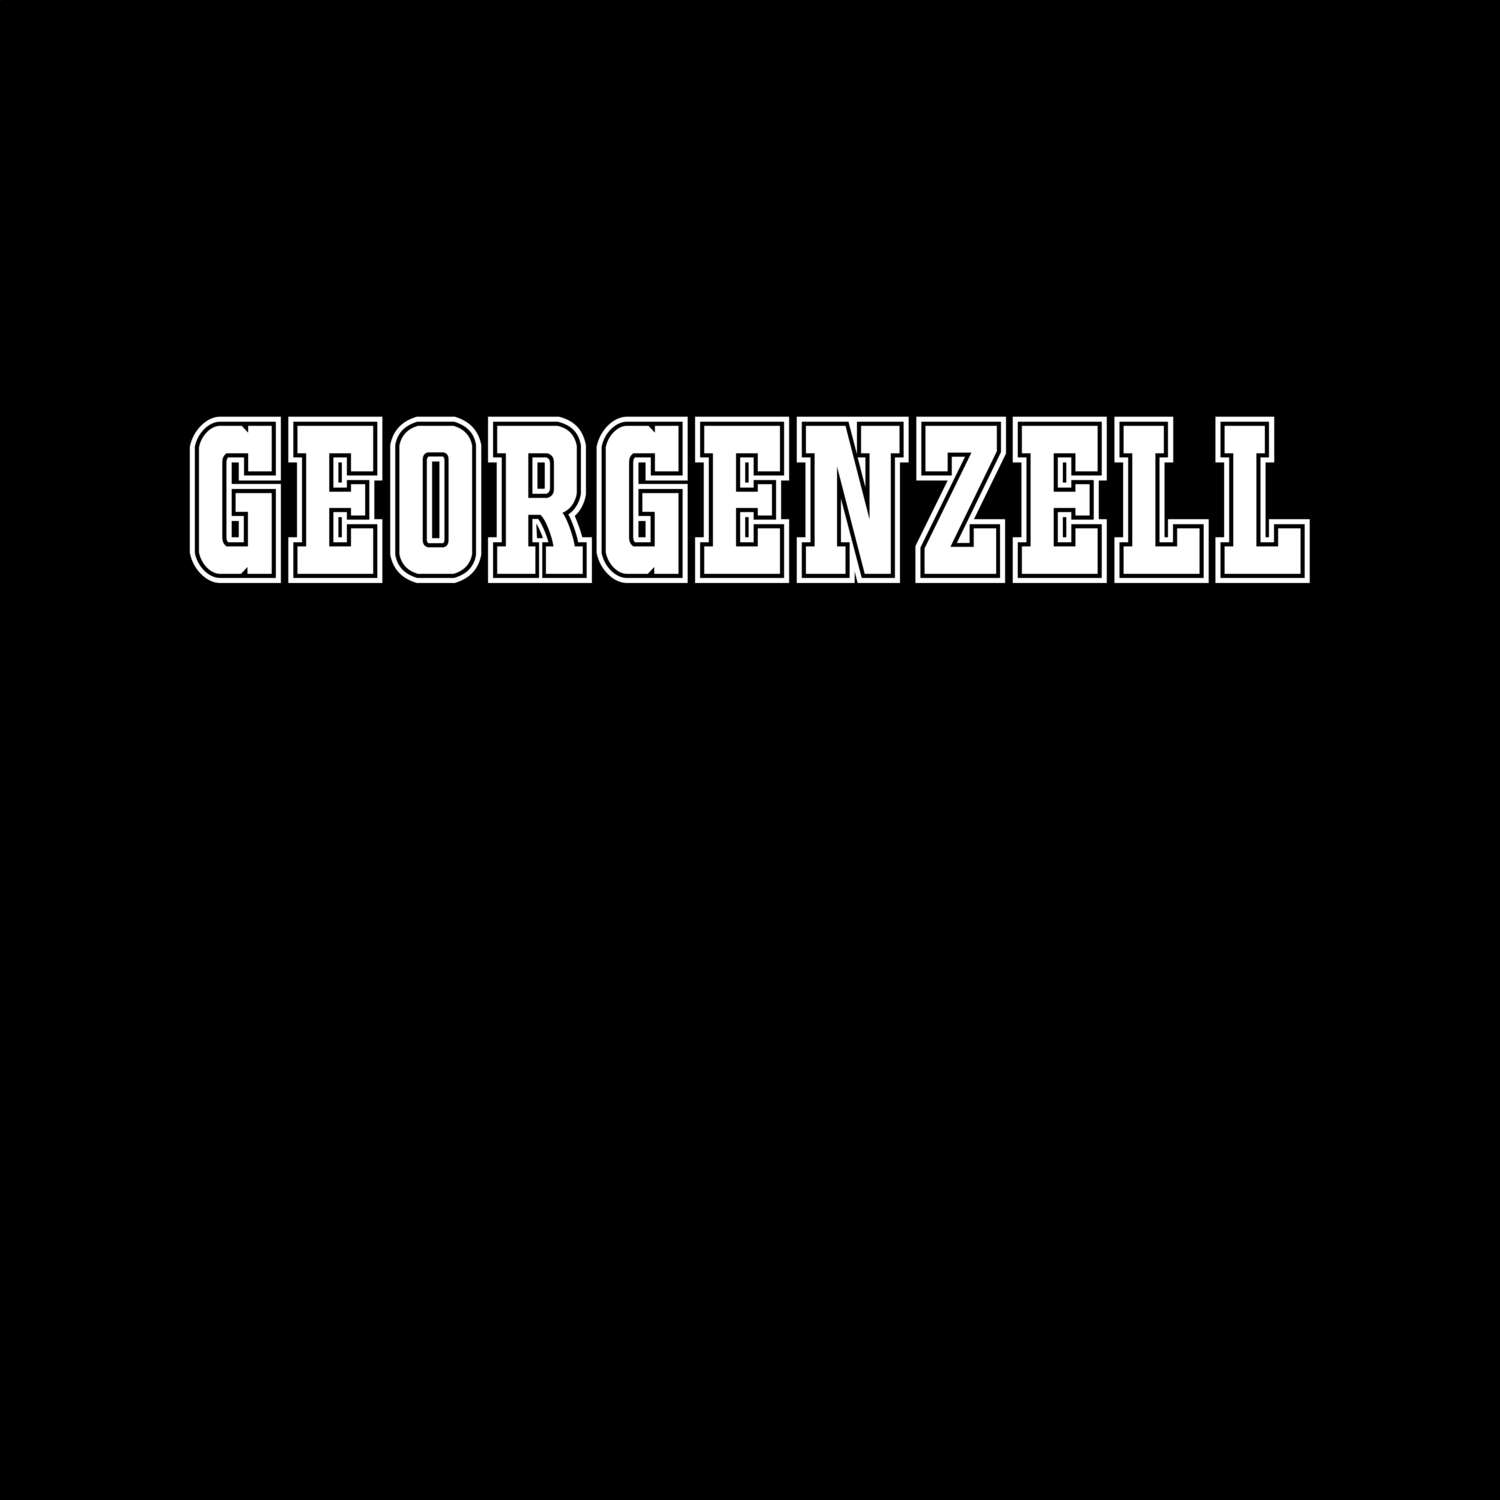 Georgenzell T-Shirt »Classic«